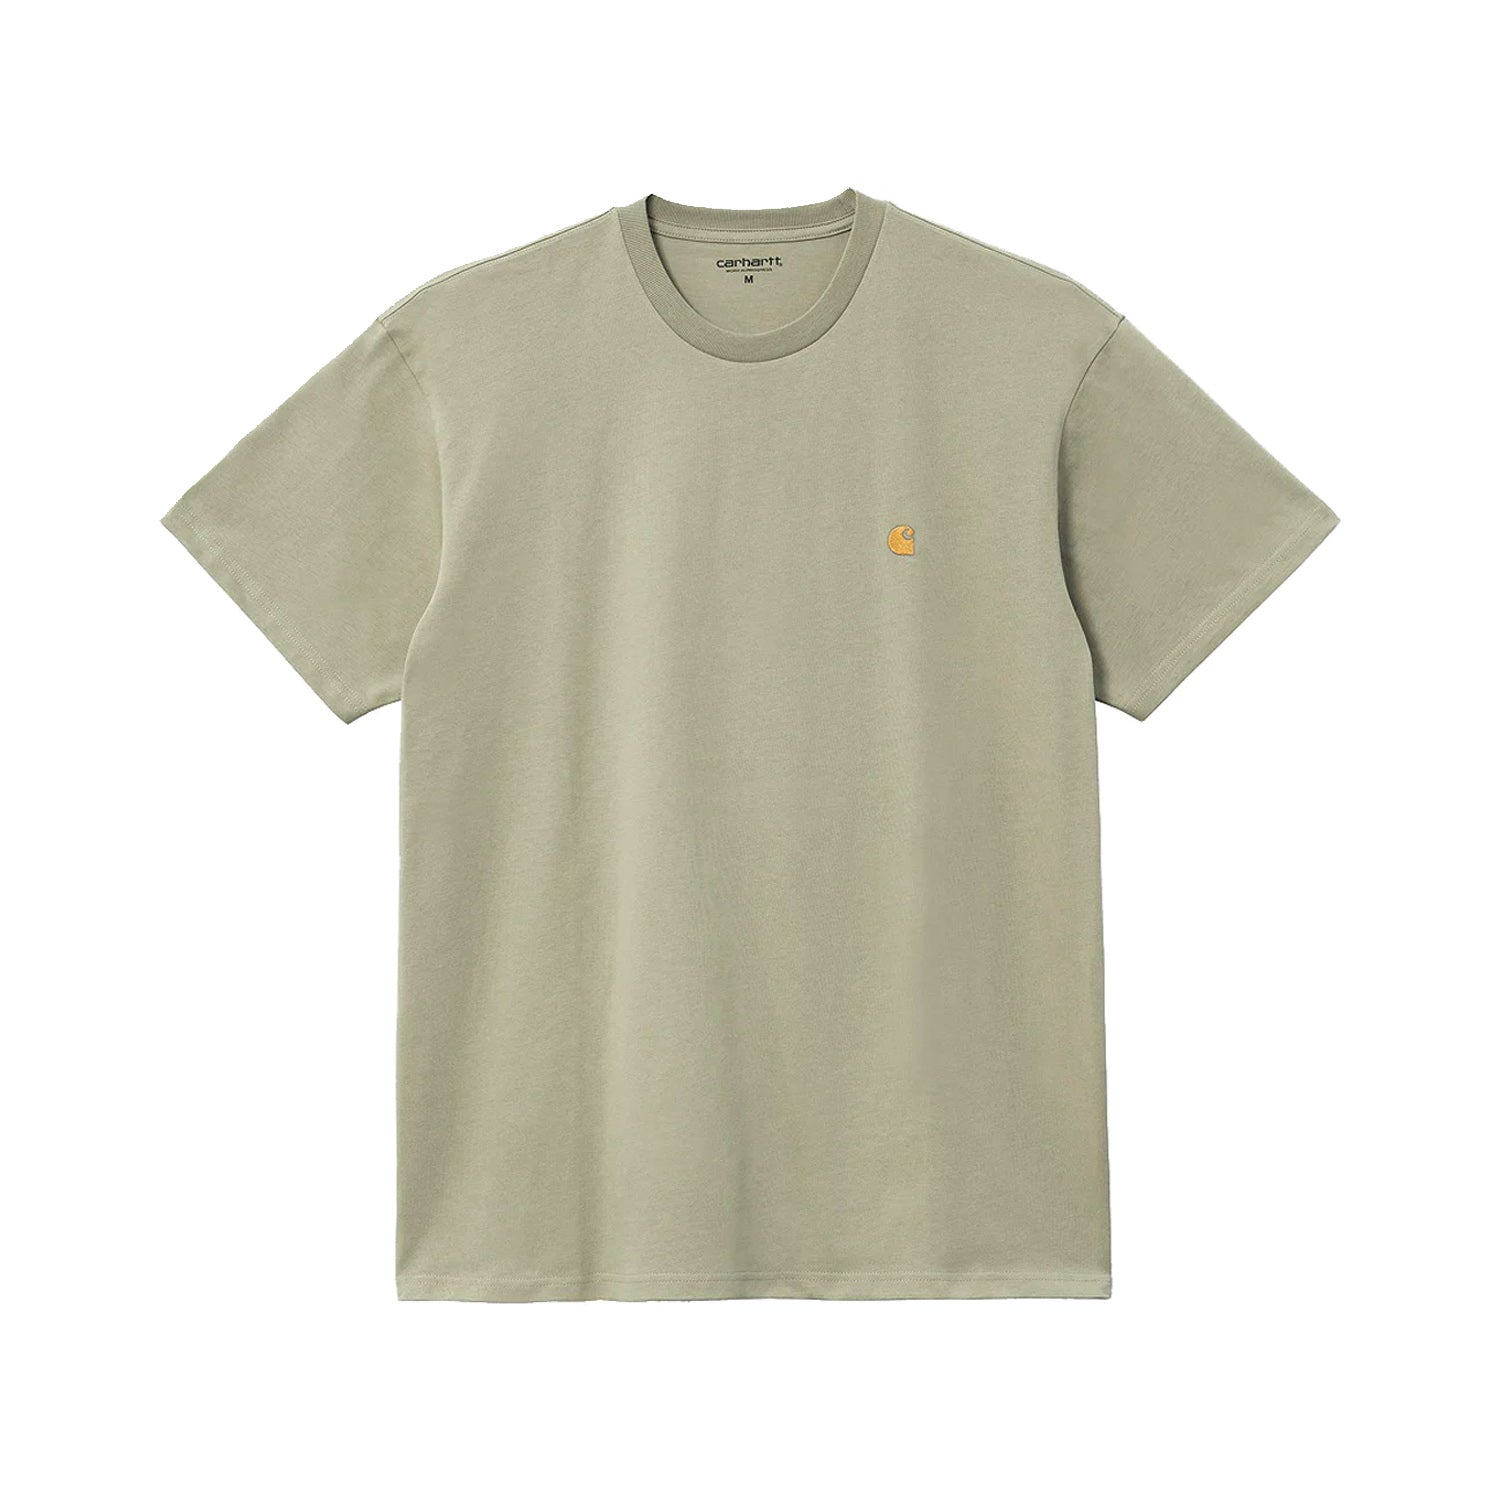 S/S  Chase T-shirt